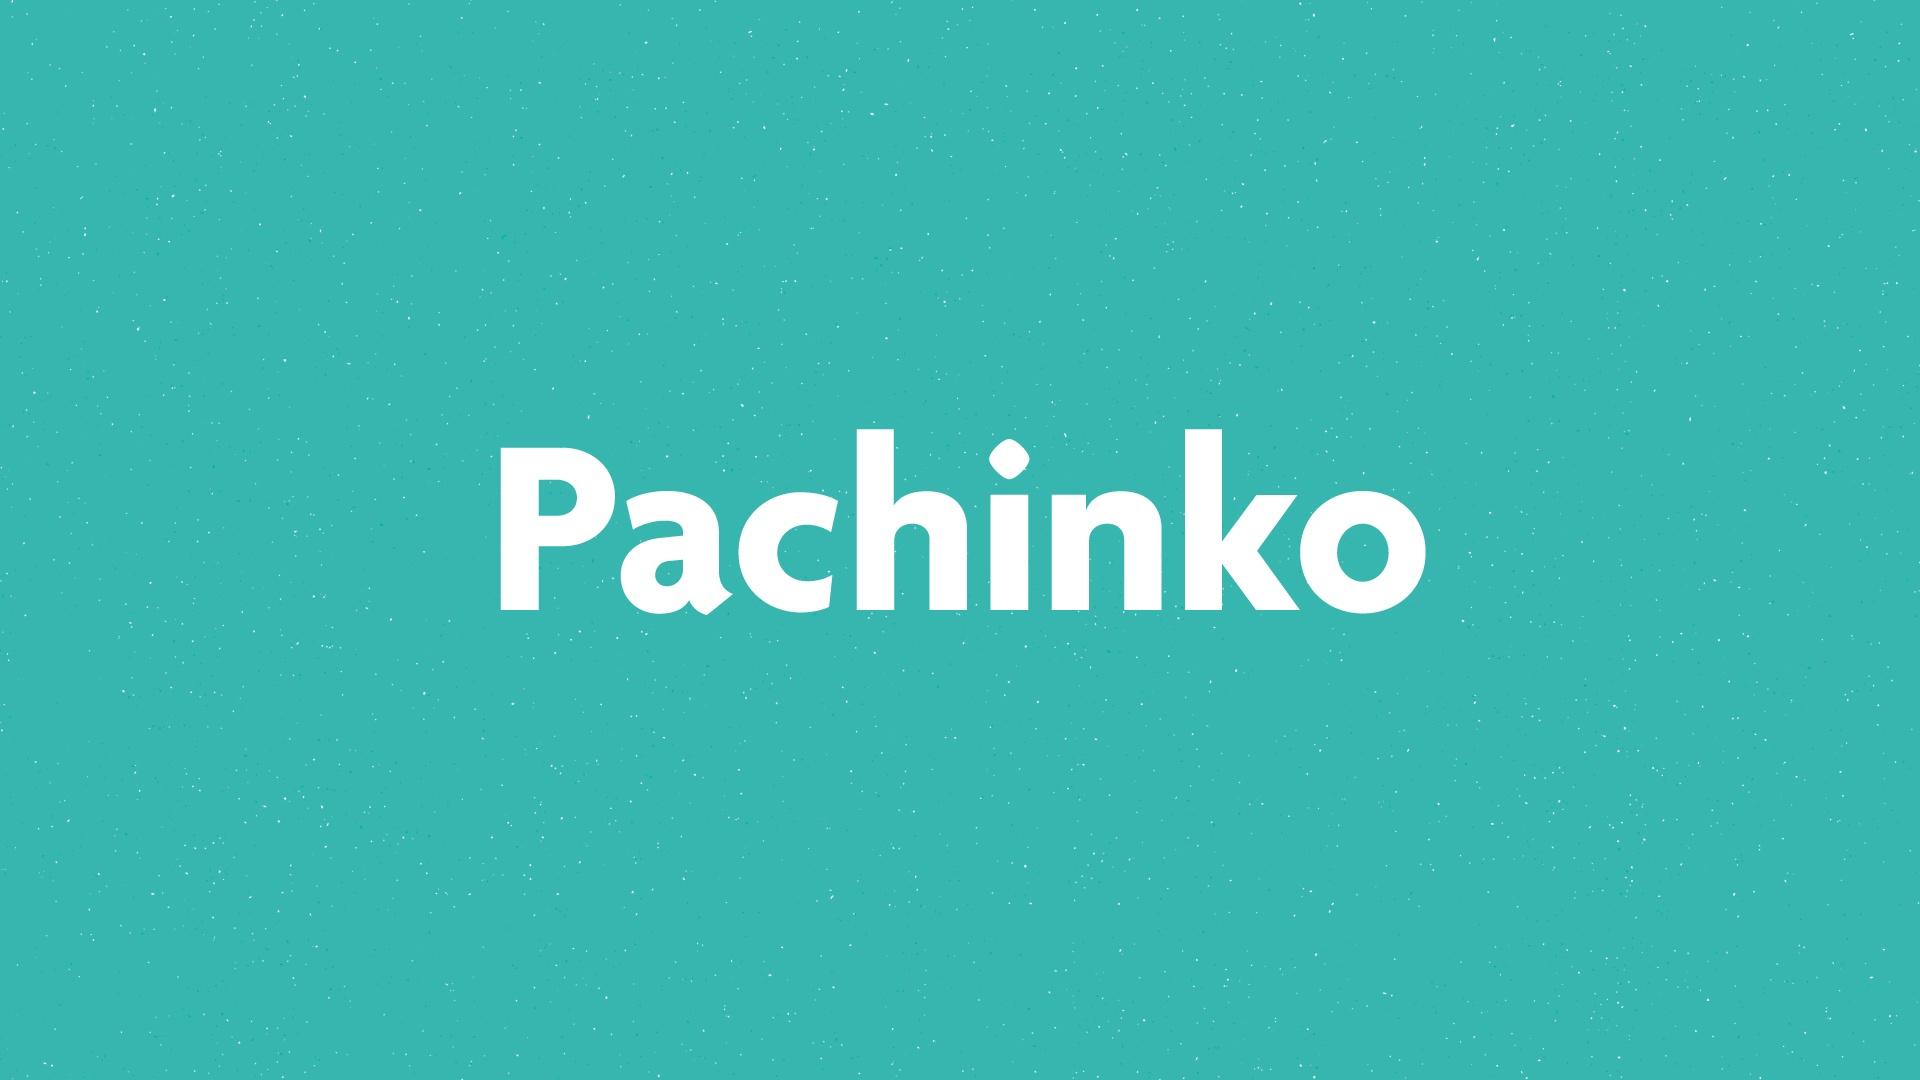 Pachinko book submission card on a green background.